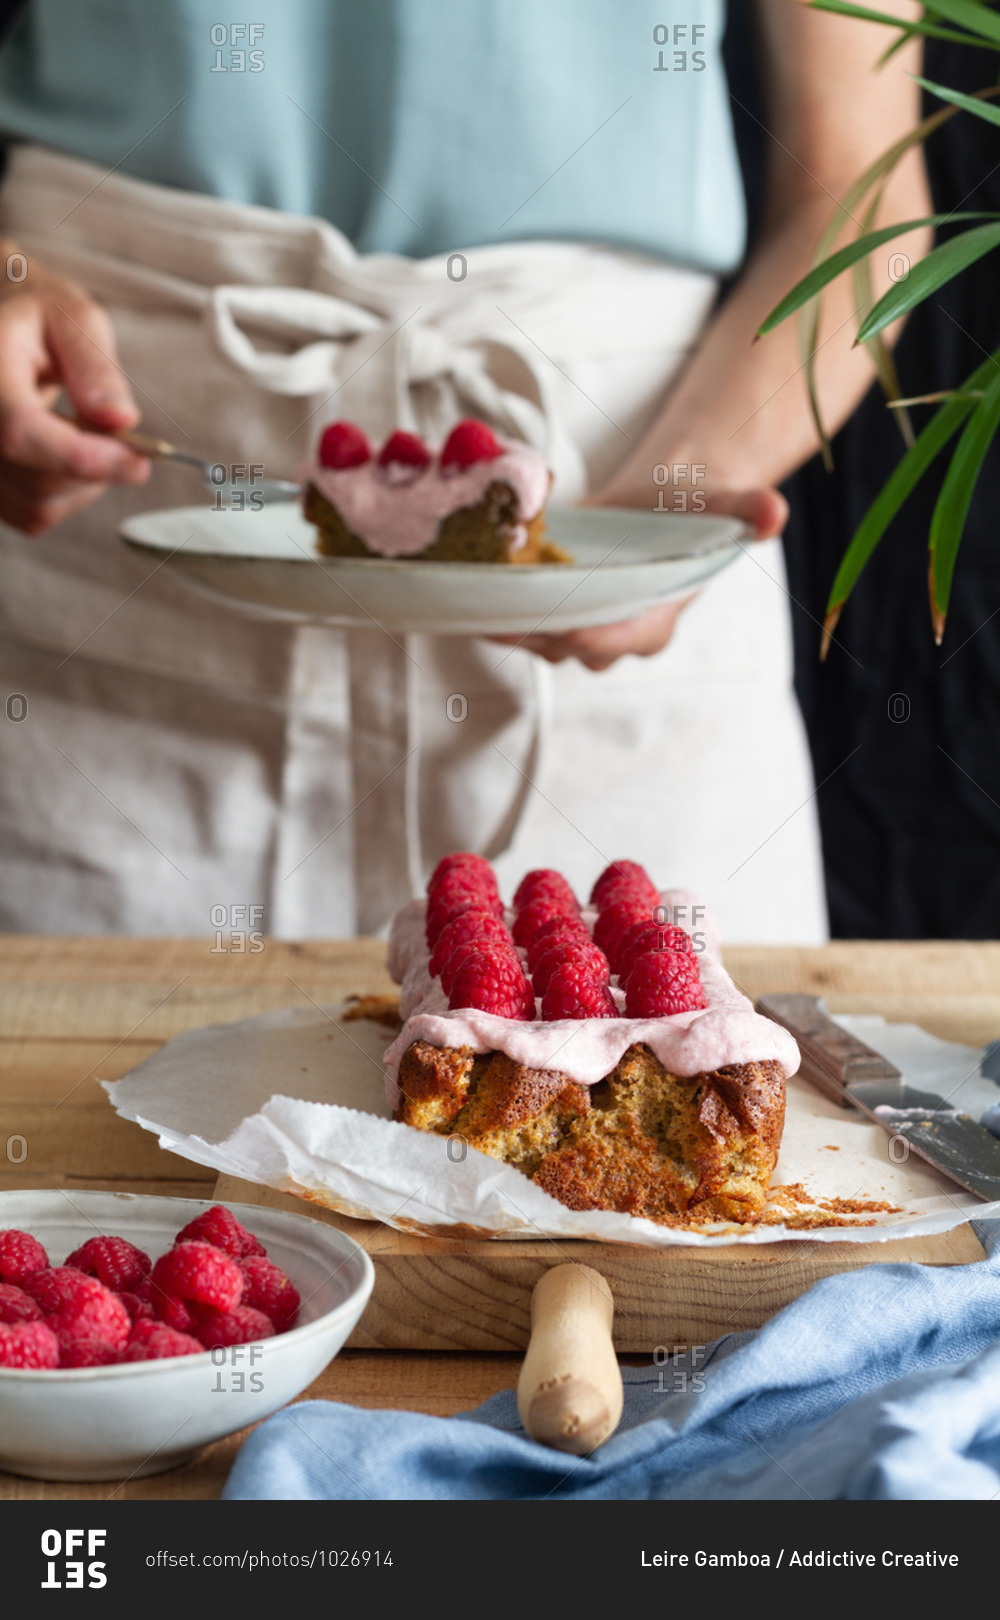 Crop anonymous female in apron standing at table with appetizing homemade cake with glaze and fresh raspberries in home kitchen